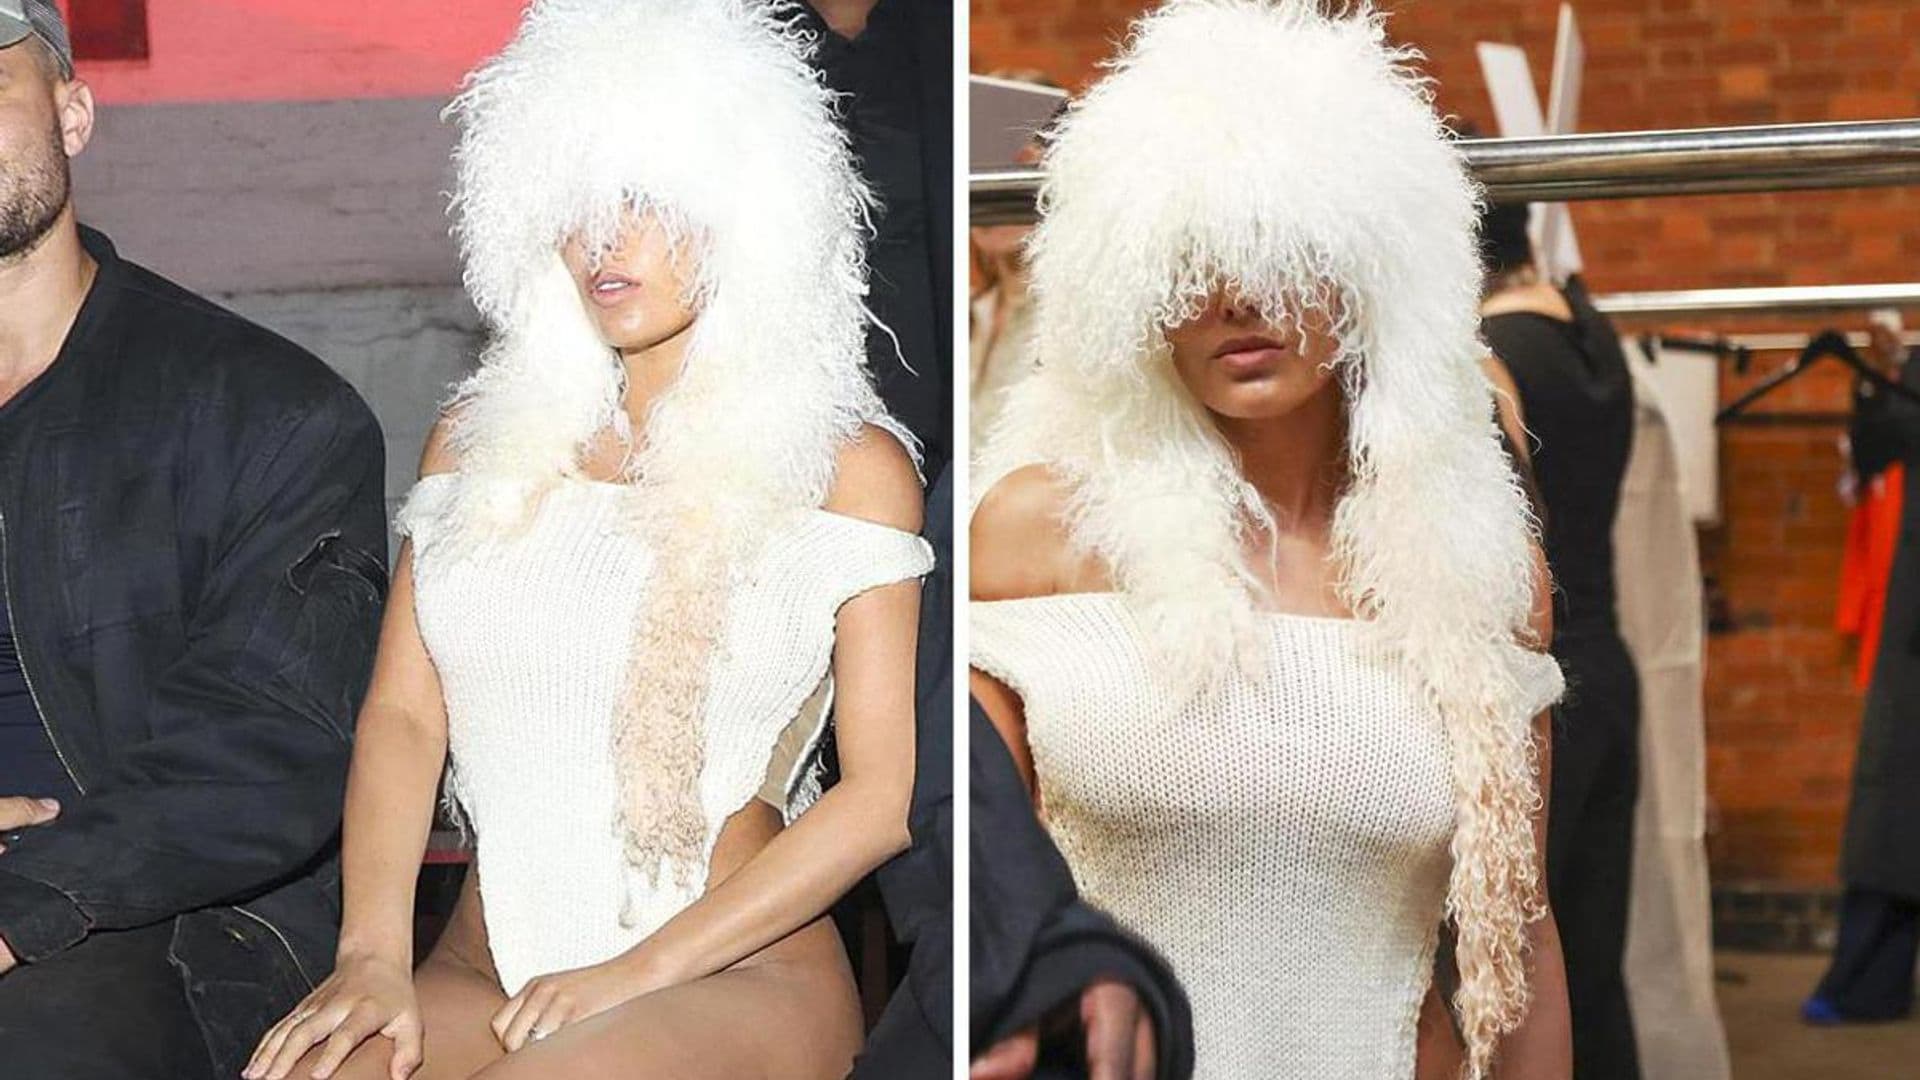 Bianca Censori shows off her curves in high-cut bodysuit and fluffy headpiece at London Fashion Week